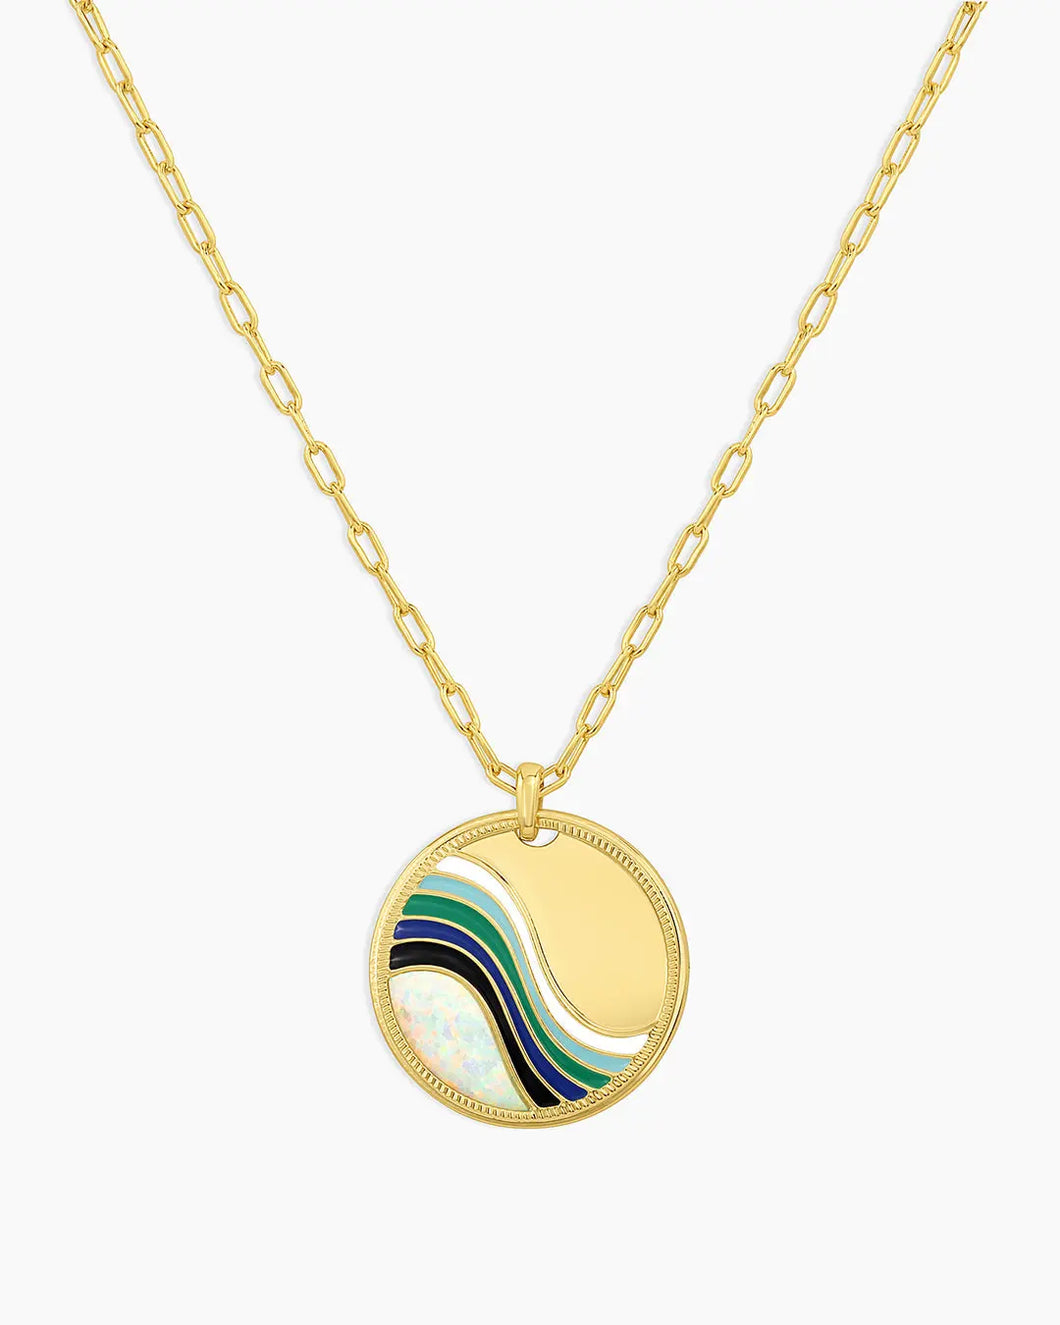 GOR Swell Pendant Necklace